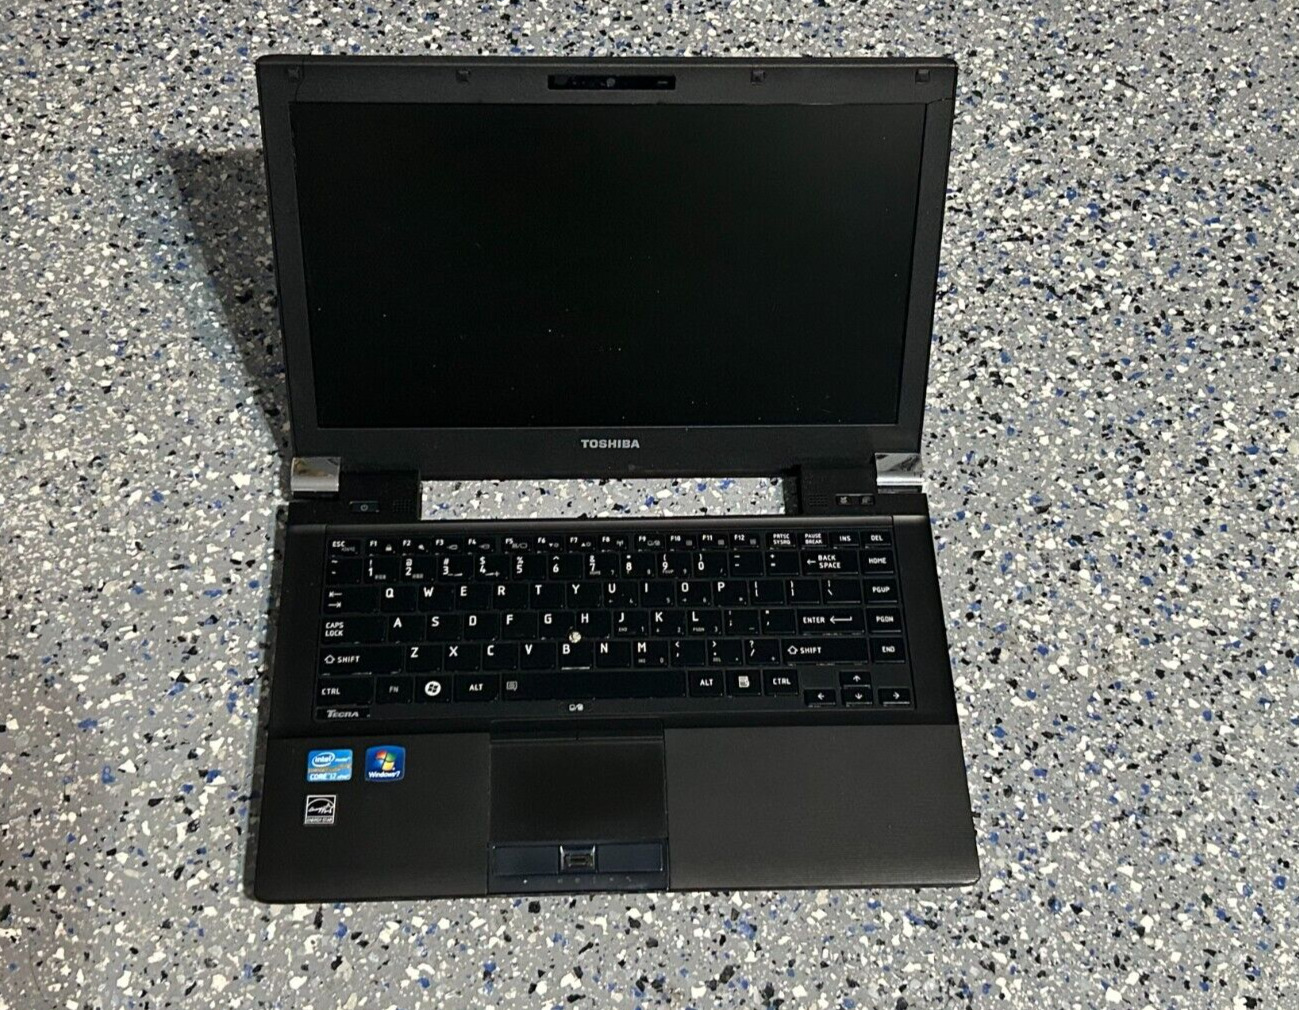 Toshiba Tecra R840 Core i7 No RAM, NO HDD, No Battery  - Crack - FOR PARTS ONLY